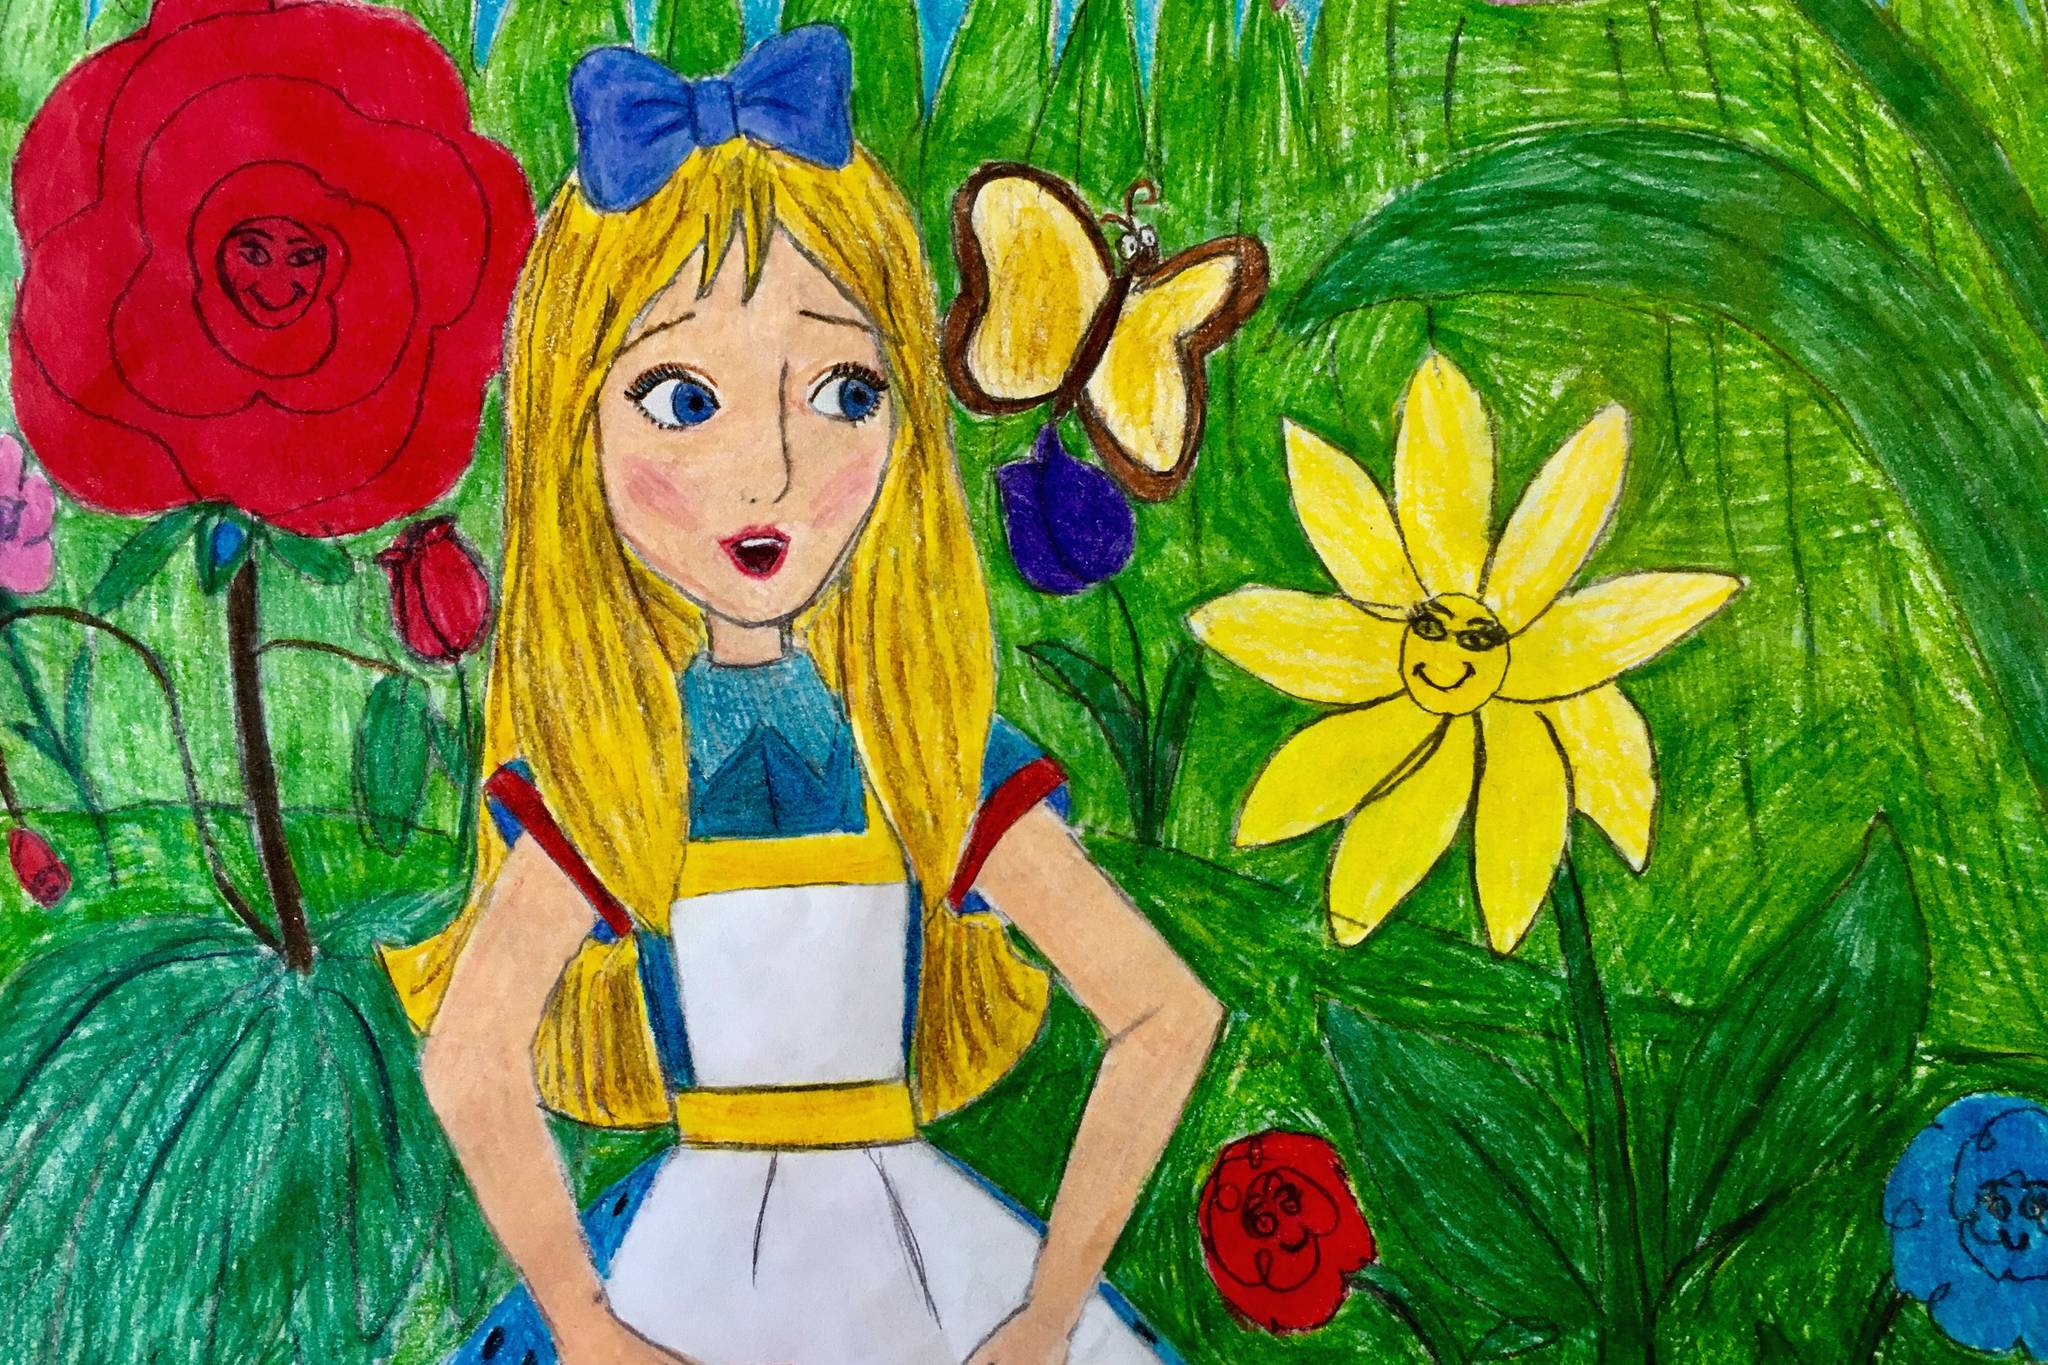 “Alice” by Amberley Parker is one of the pieces featured in the Museum of Special Art’s “Inner Reflections of Autism” exhibit. Contributed photo